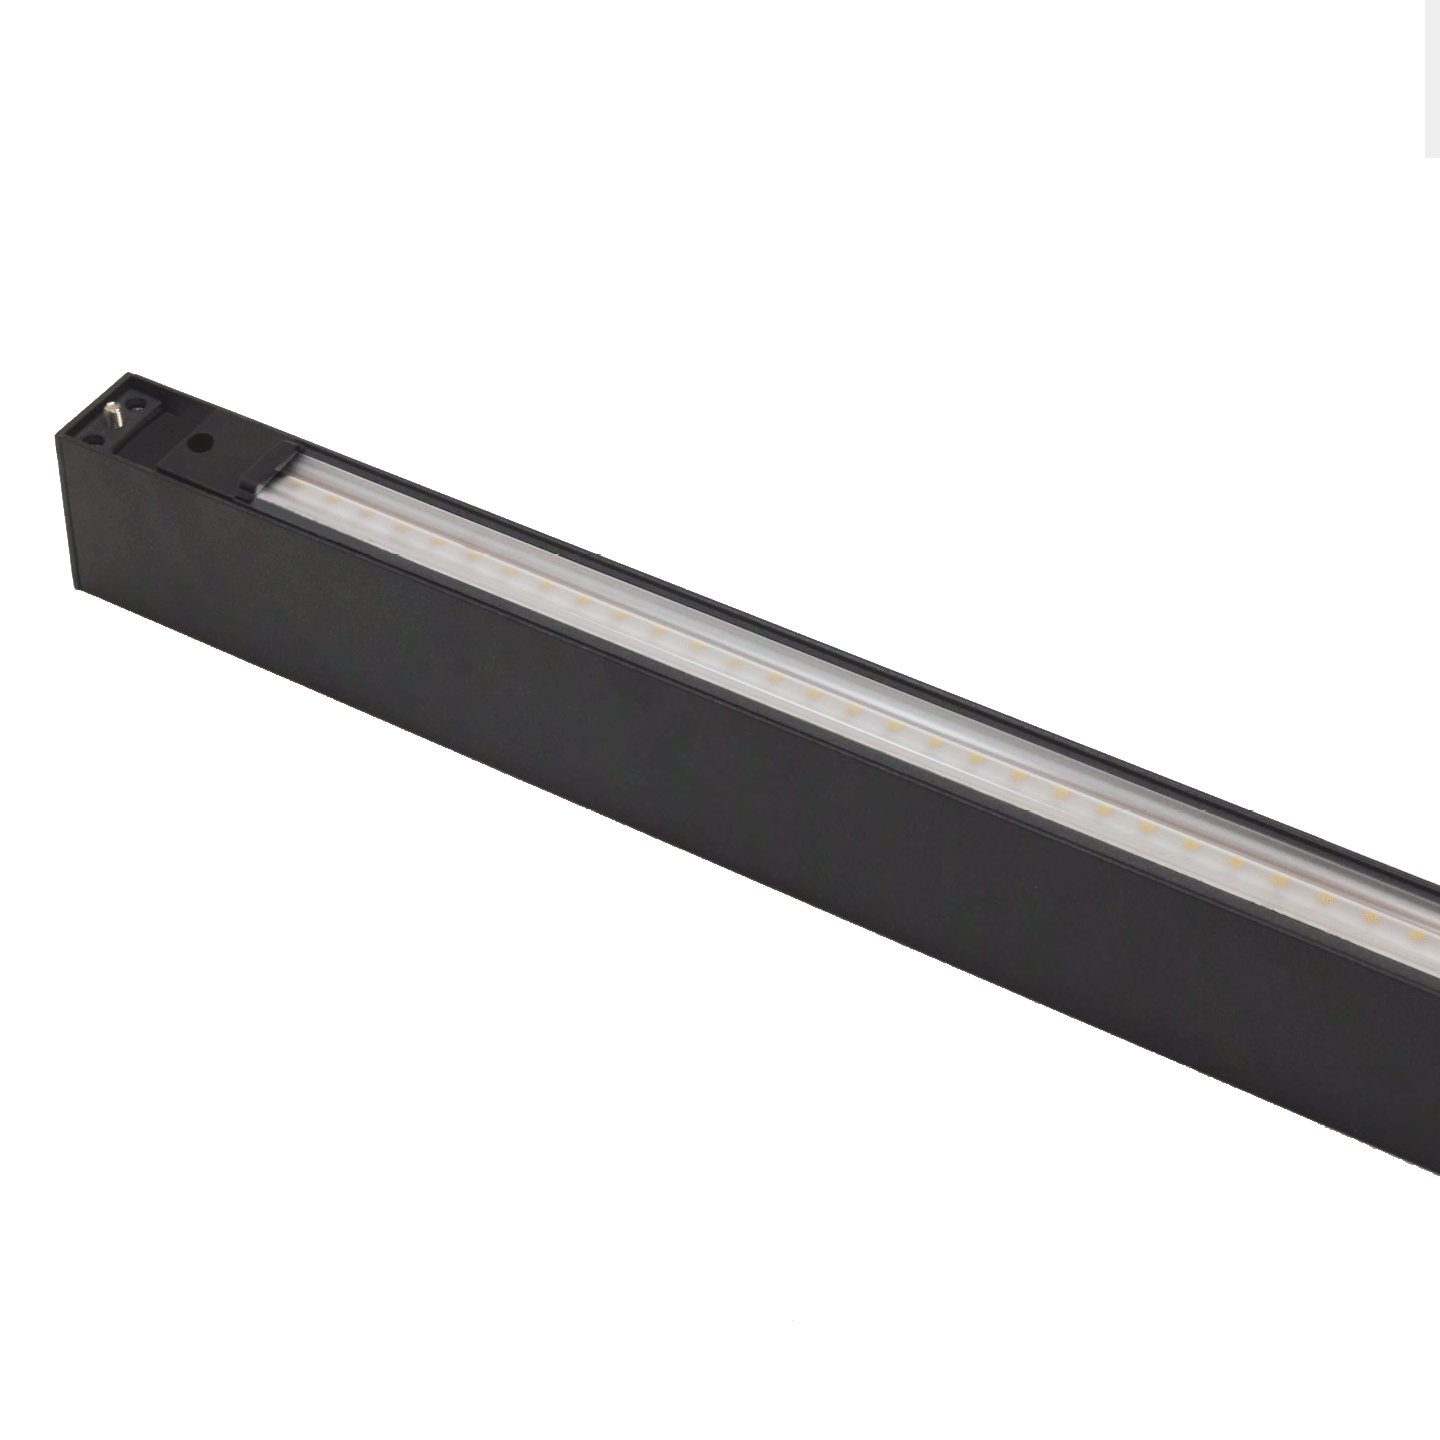 Architectural Linear Pendant - Top view of 8ft with black finish